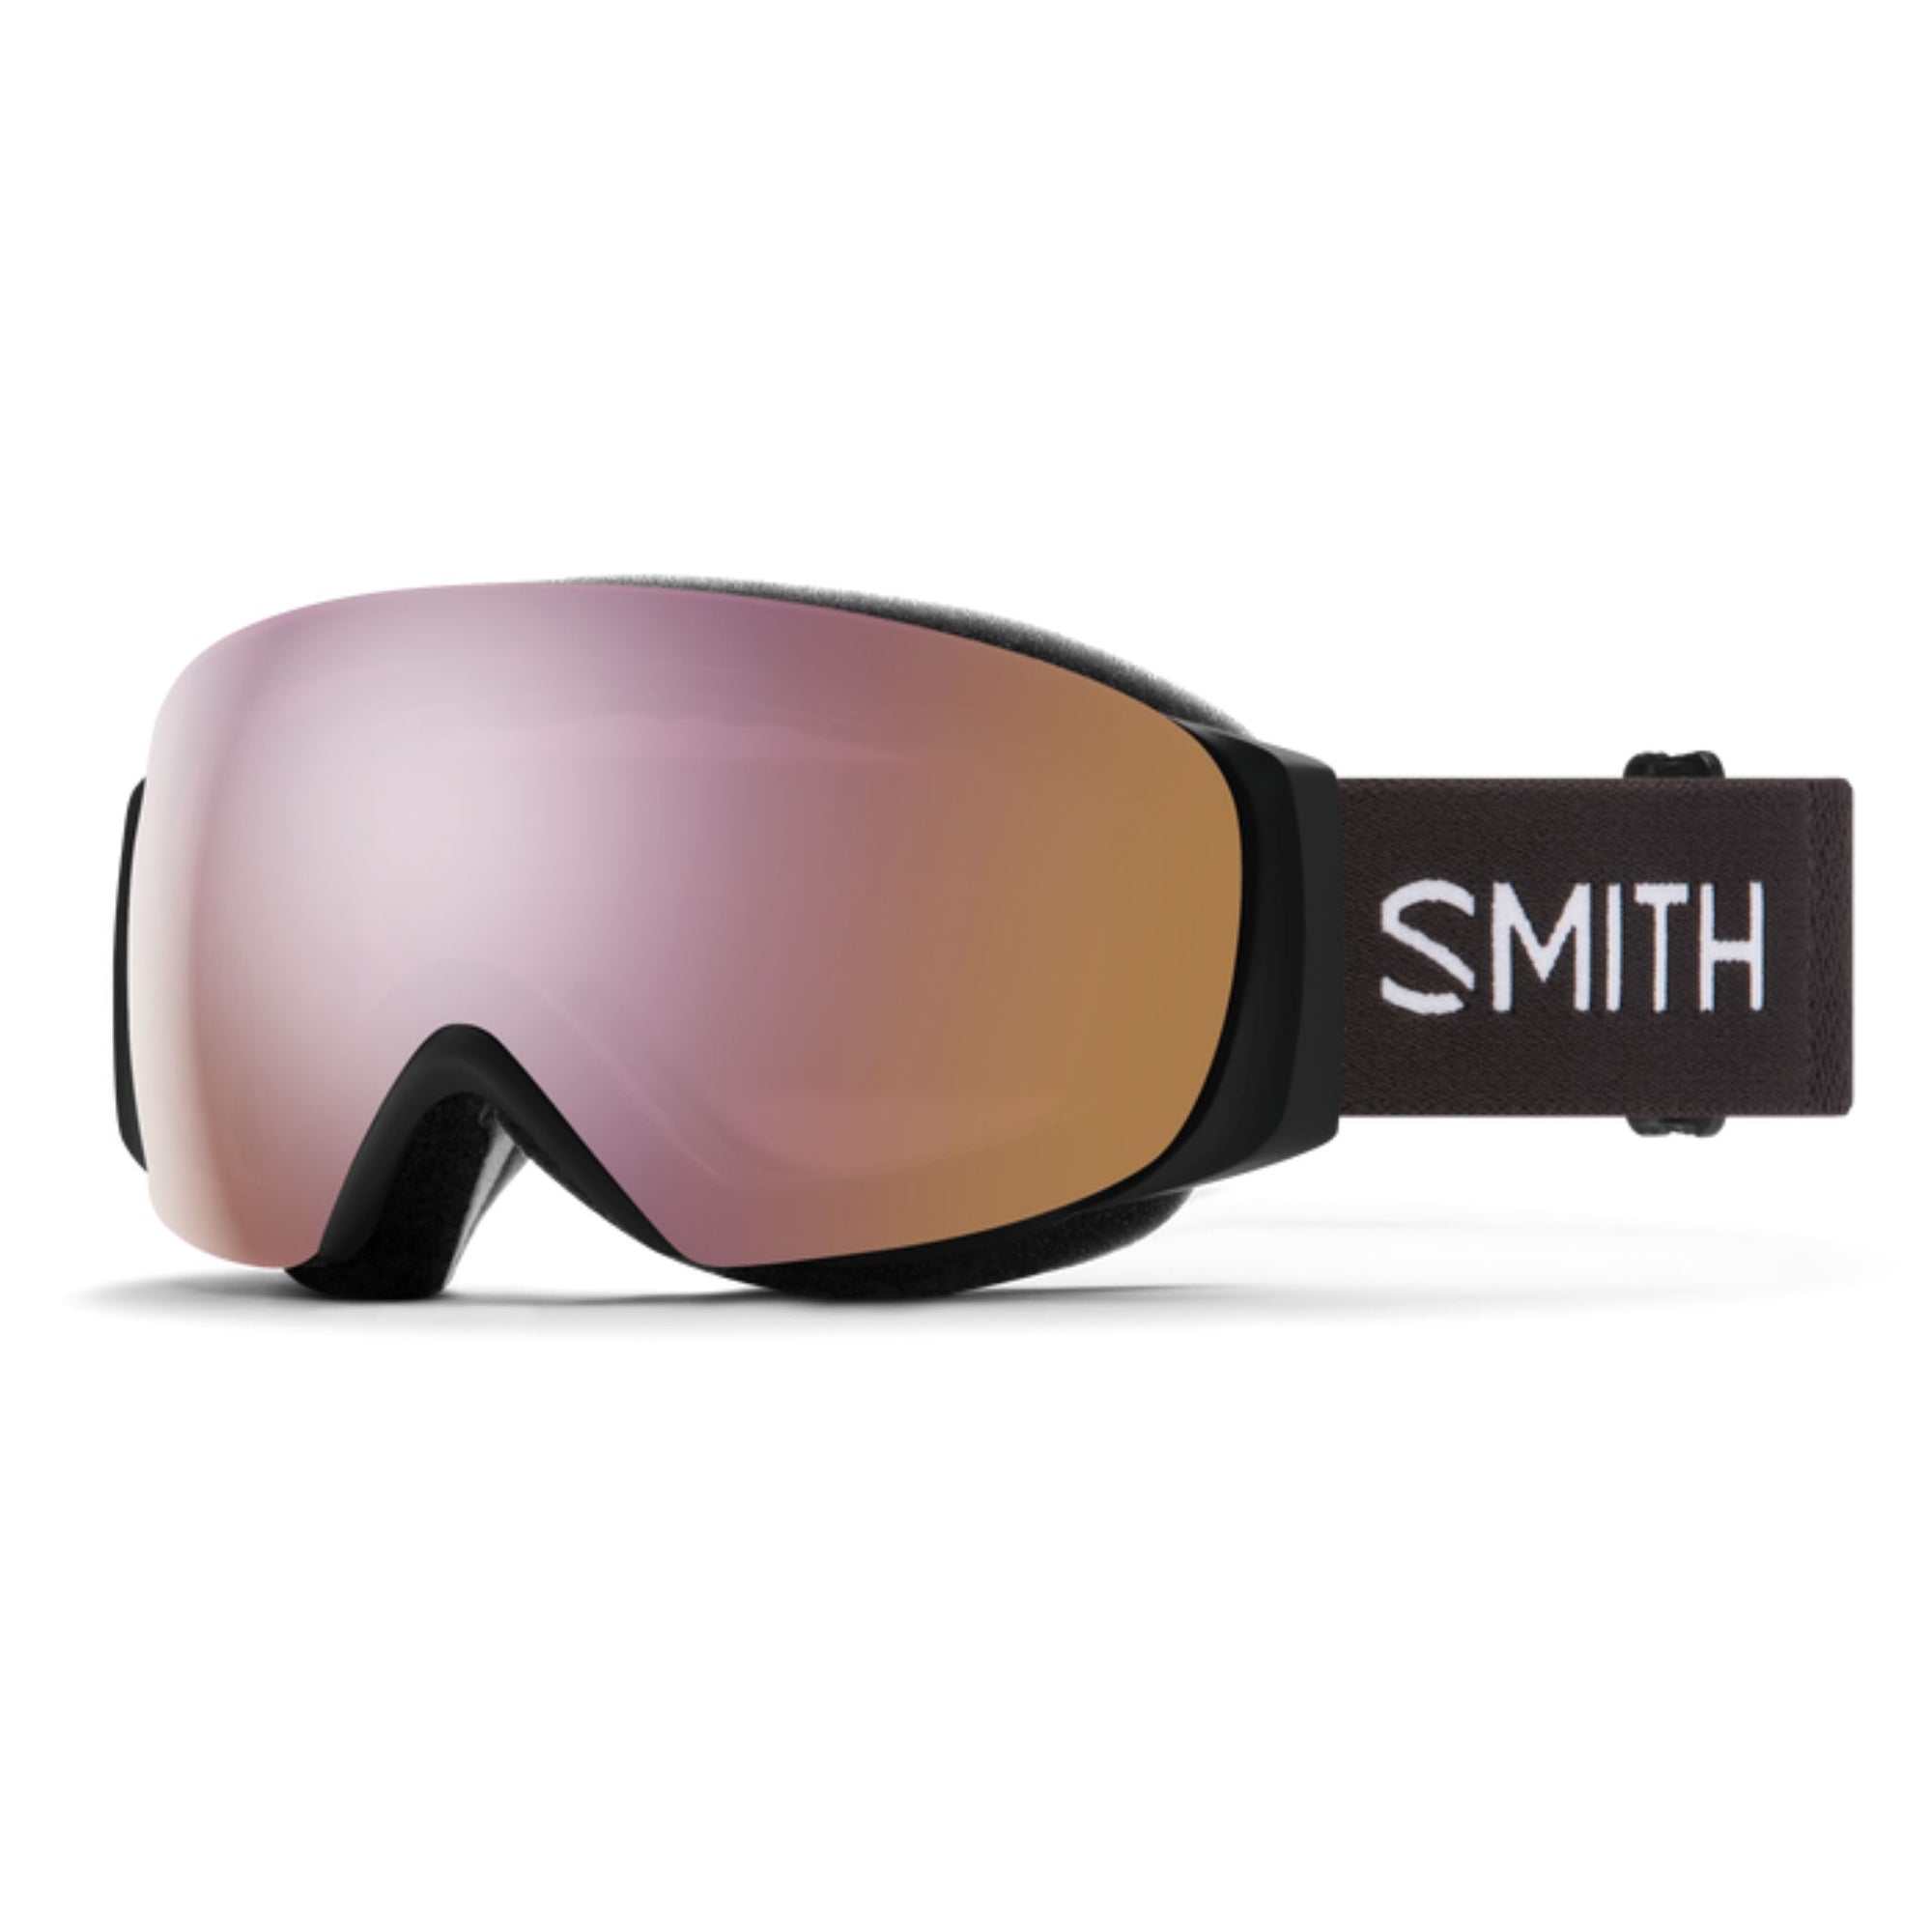 Smith I/O MAG S Goggles (Small Fit) - Black ChromaPop Everyday Rose Gold Mirror Goggles Smith 